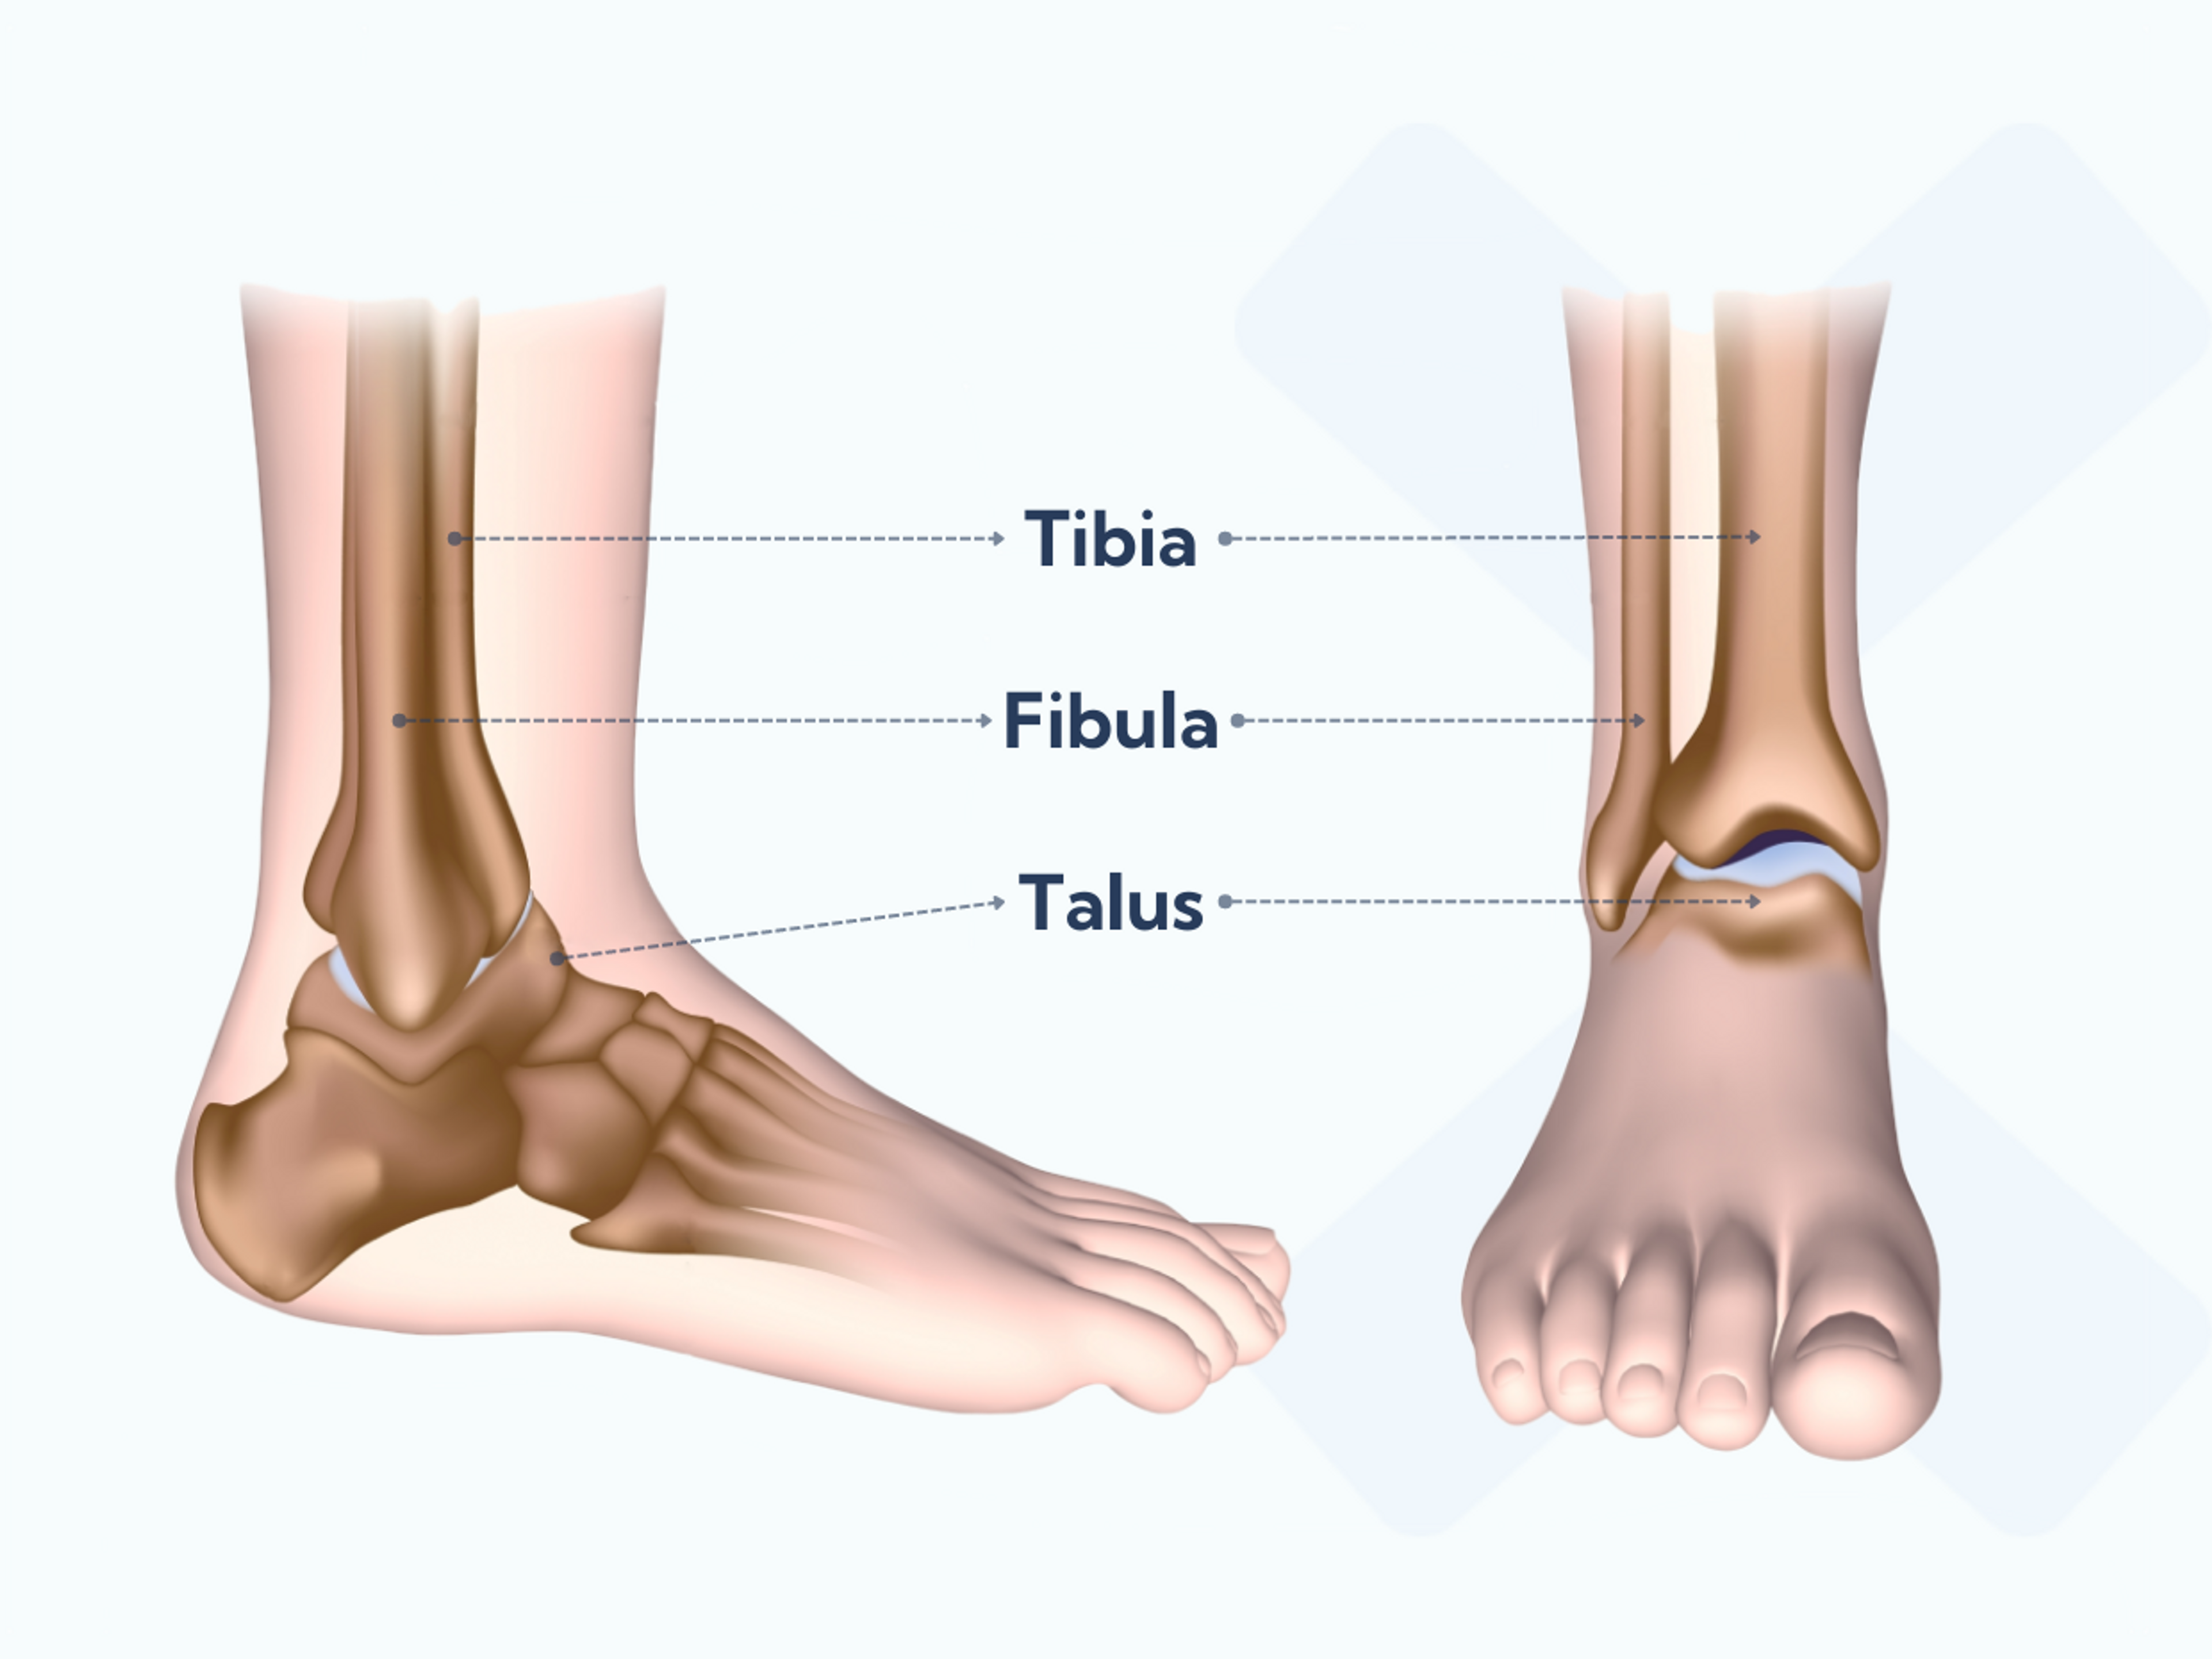 Anatomy of the ankle joint: bones